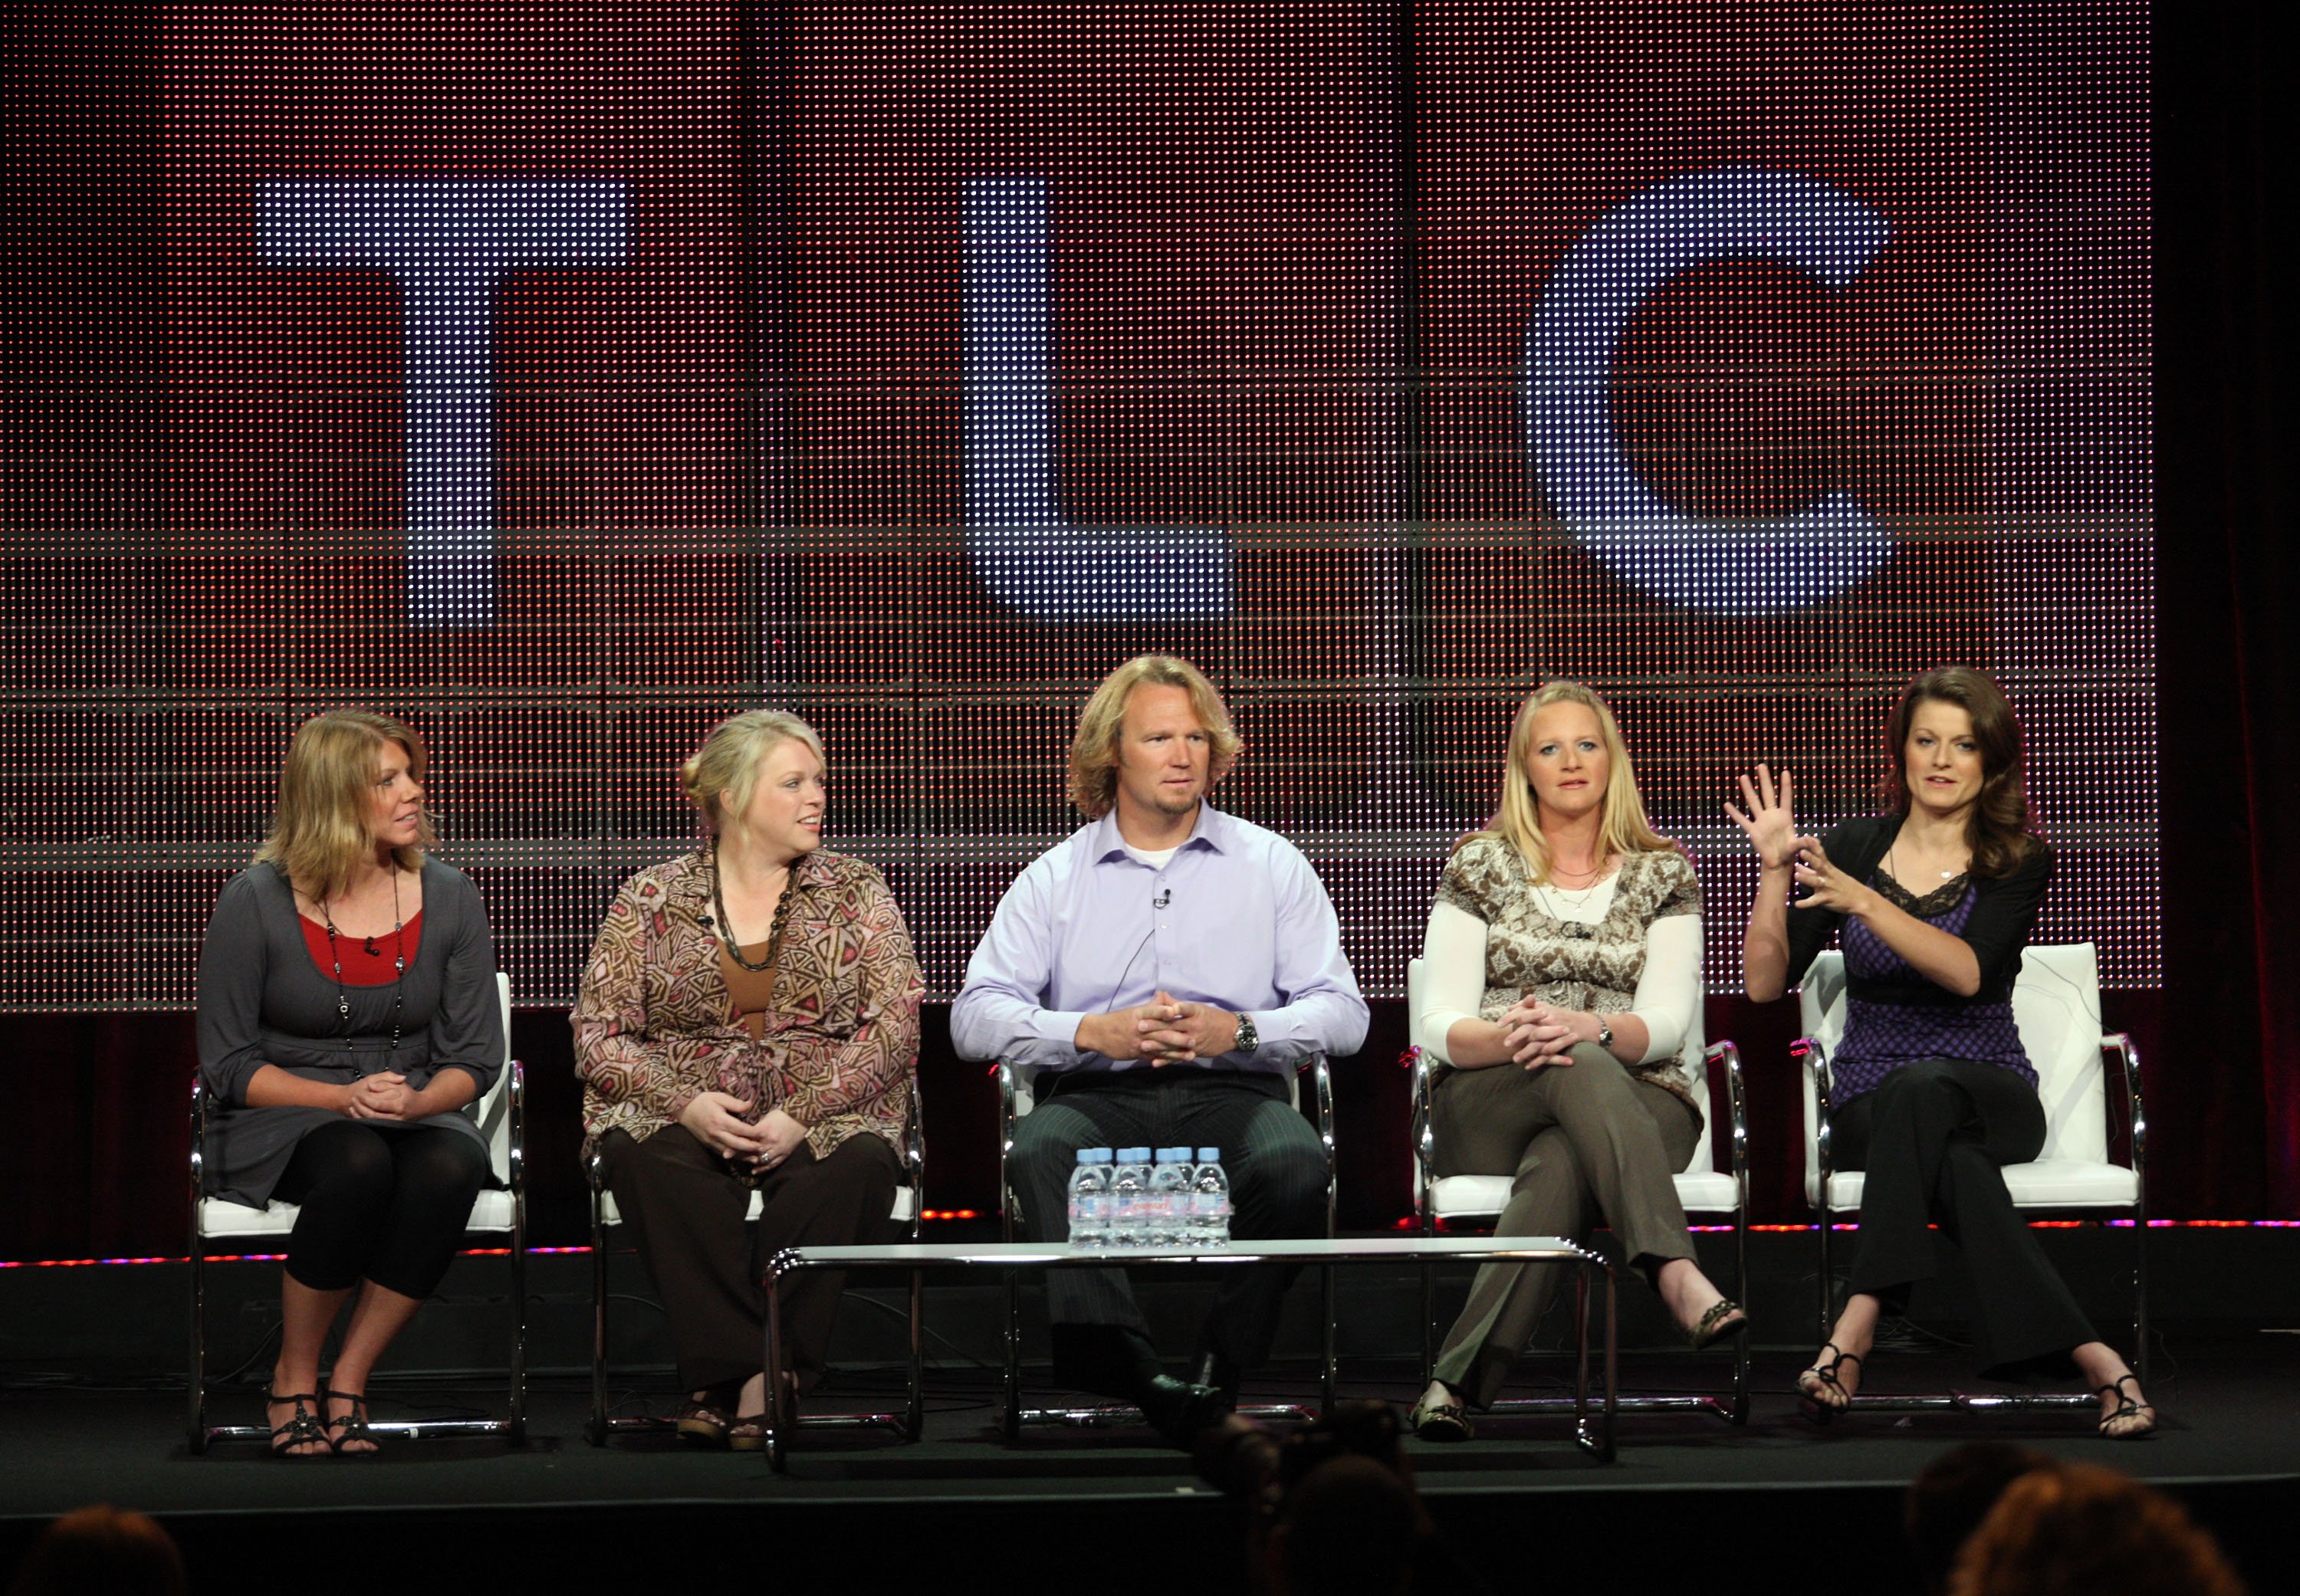 Meri Brown, Janelle Brown, Kody Brown, Christine Brown, and Robyn Brown speak during the Discovery Communications portion of the 2010 Summer TCA press tour